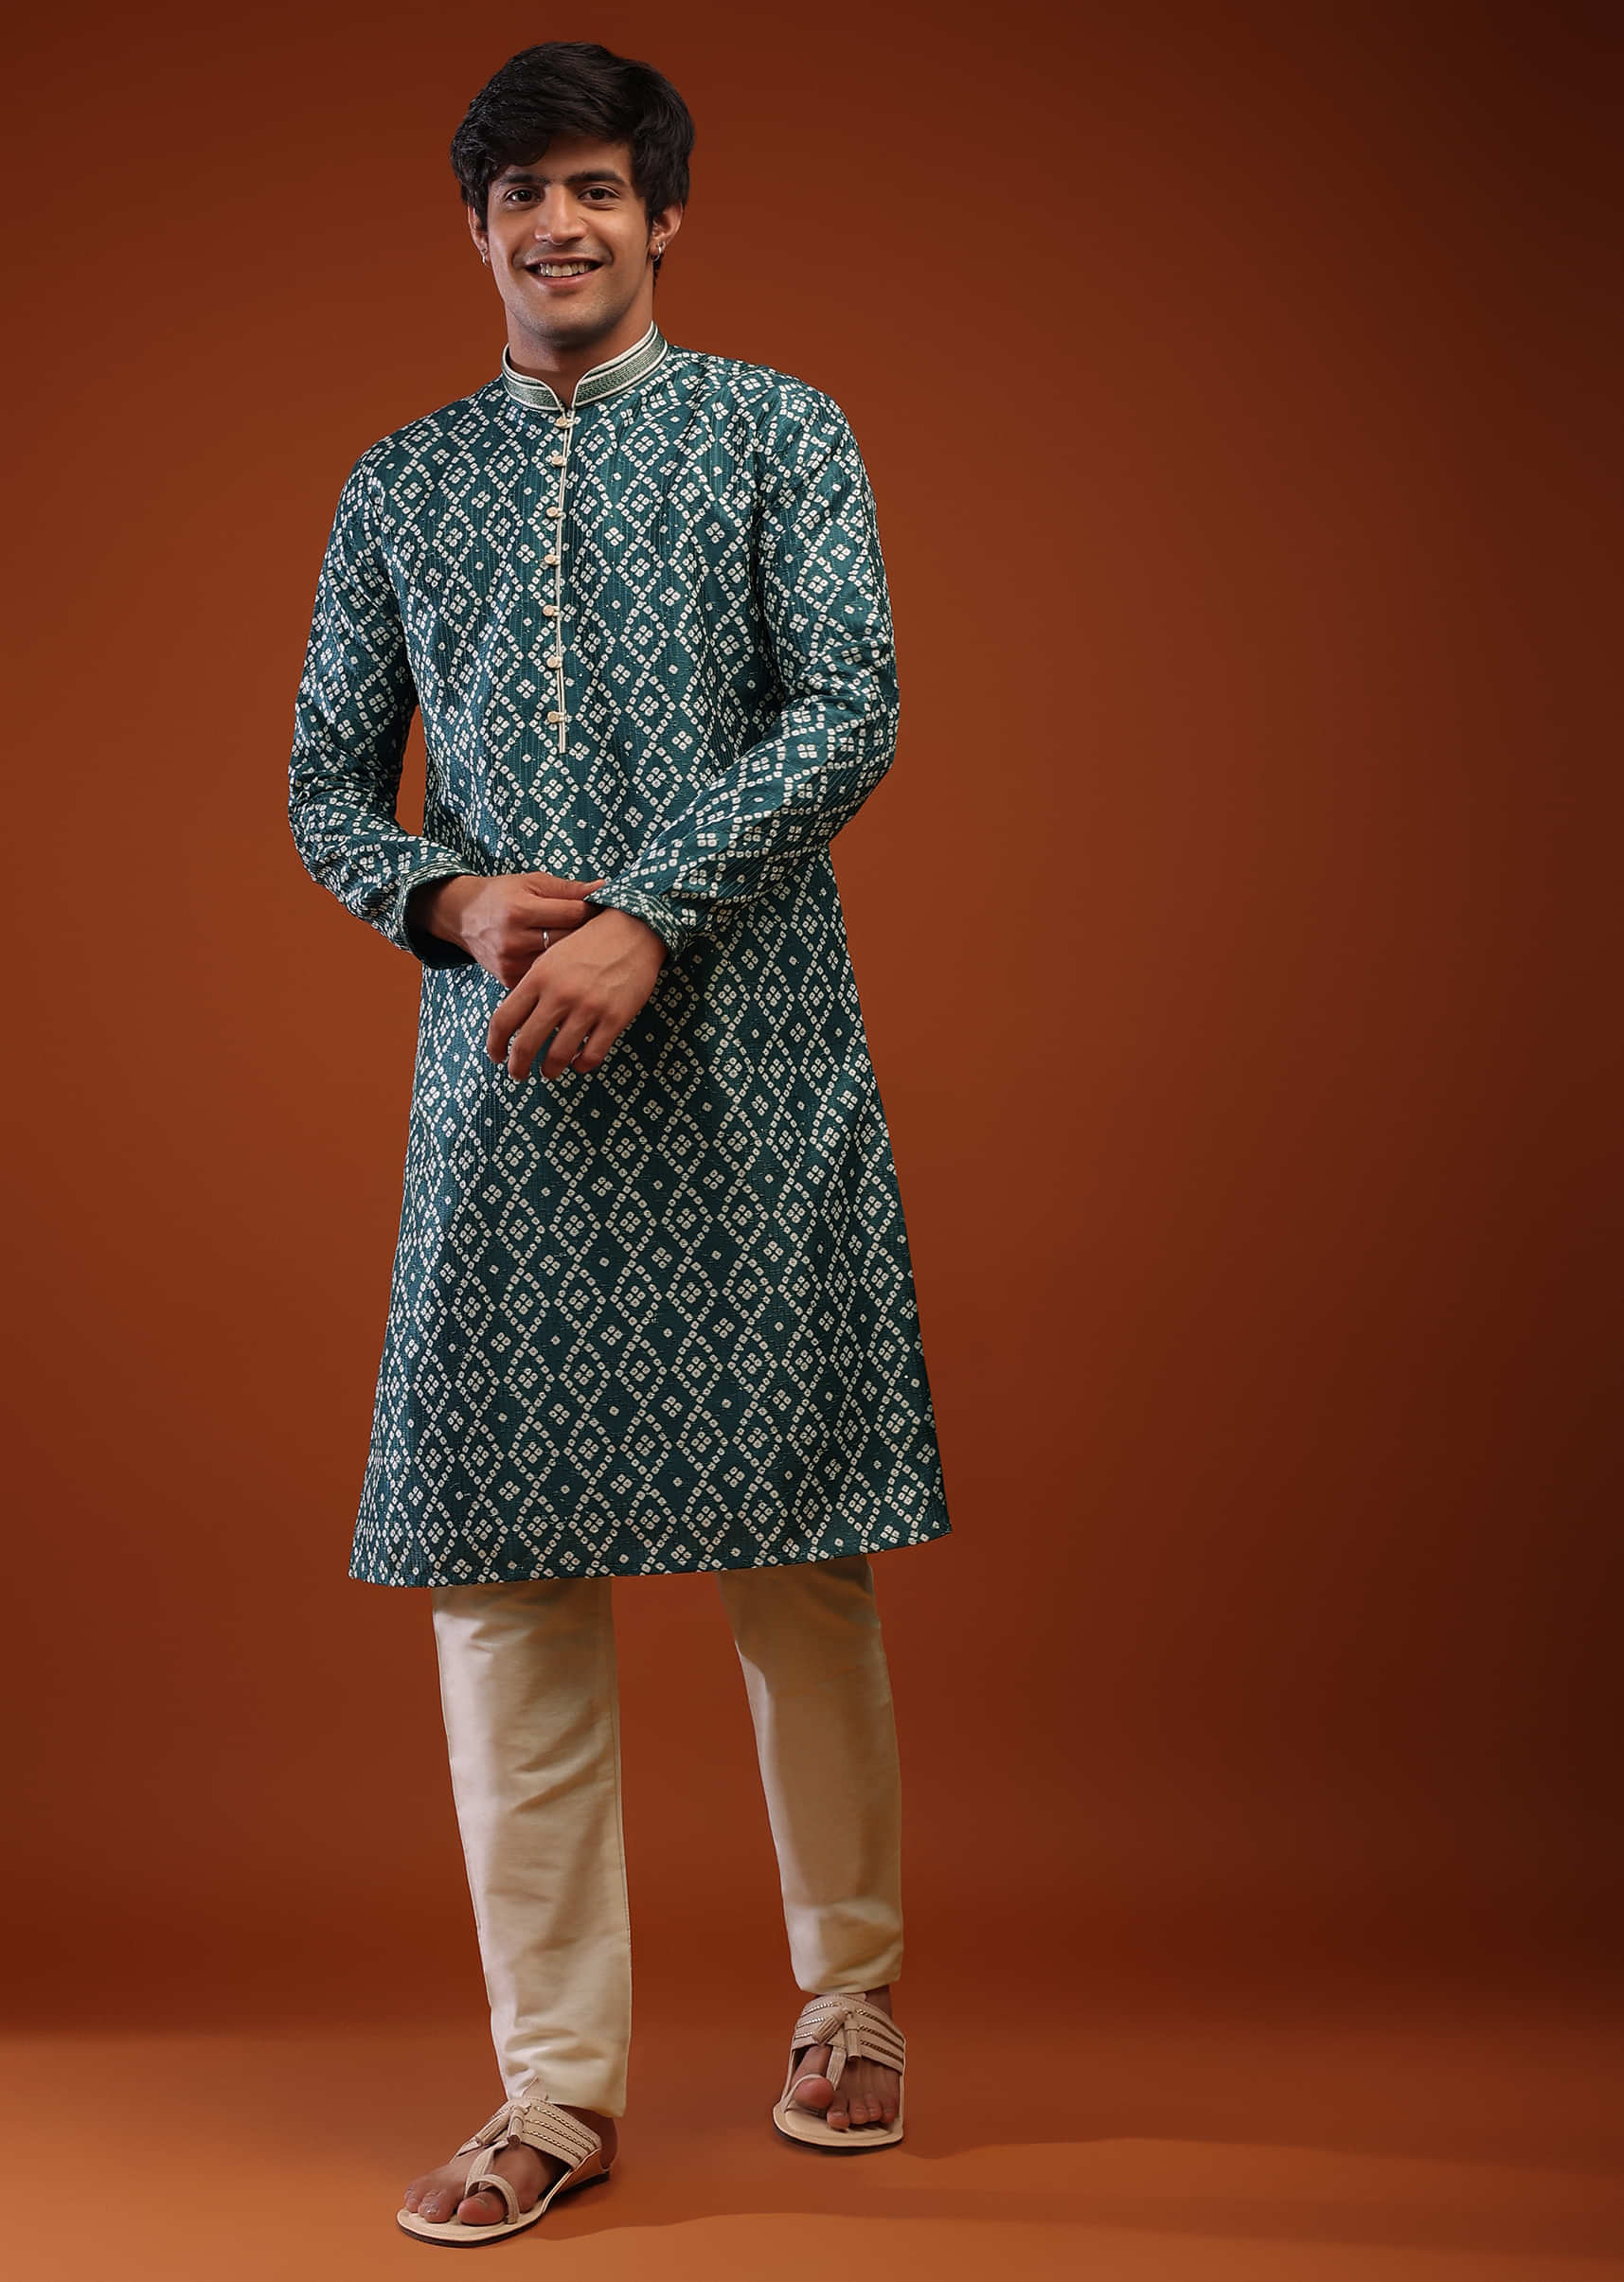 Ocean Blue Silk Kurta Set Adorned With Bandhani Print, Sequins And Threadwork Embroidery